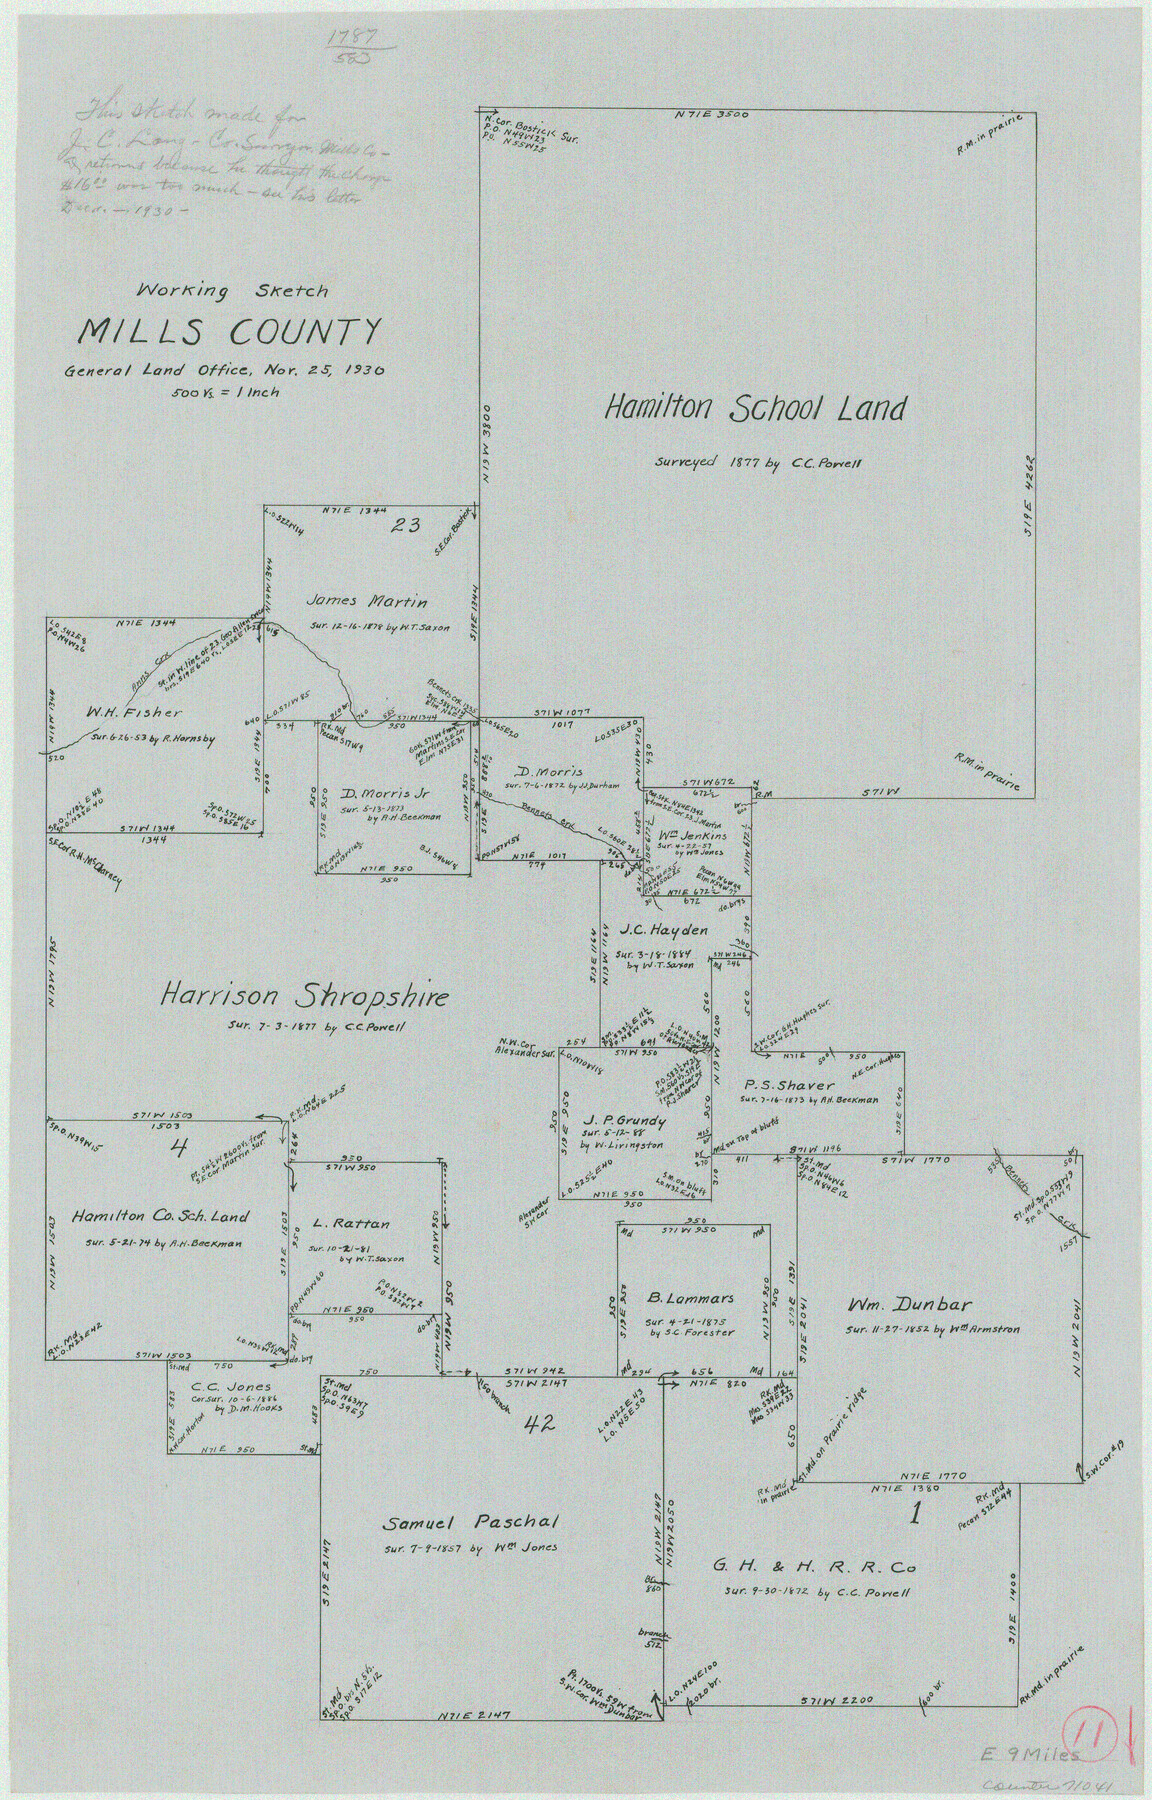 71041, Mills County Working Sketch 11, General Map Collection